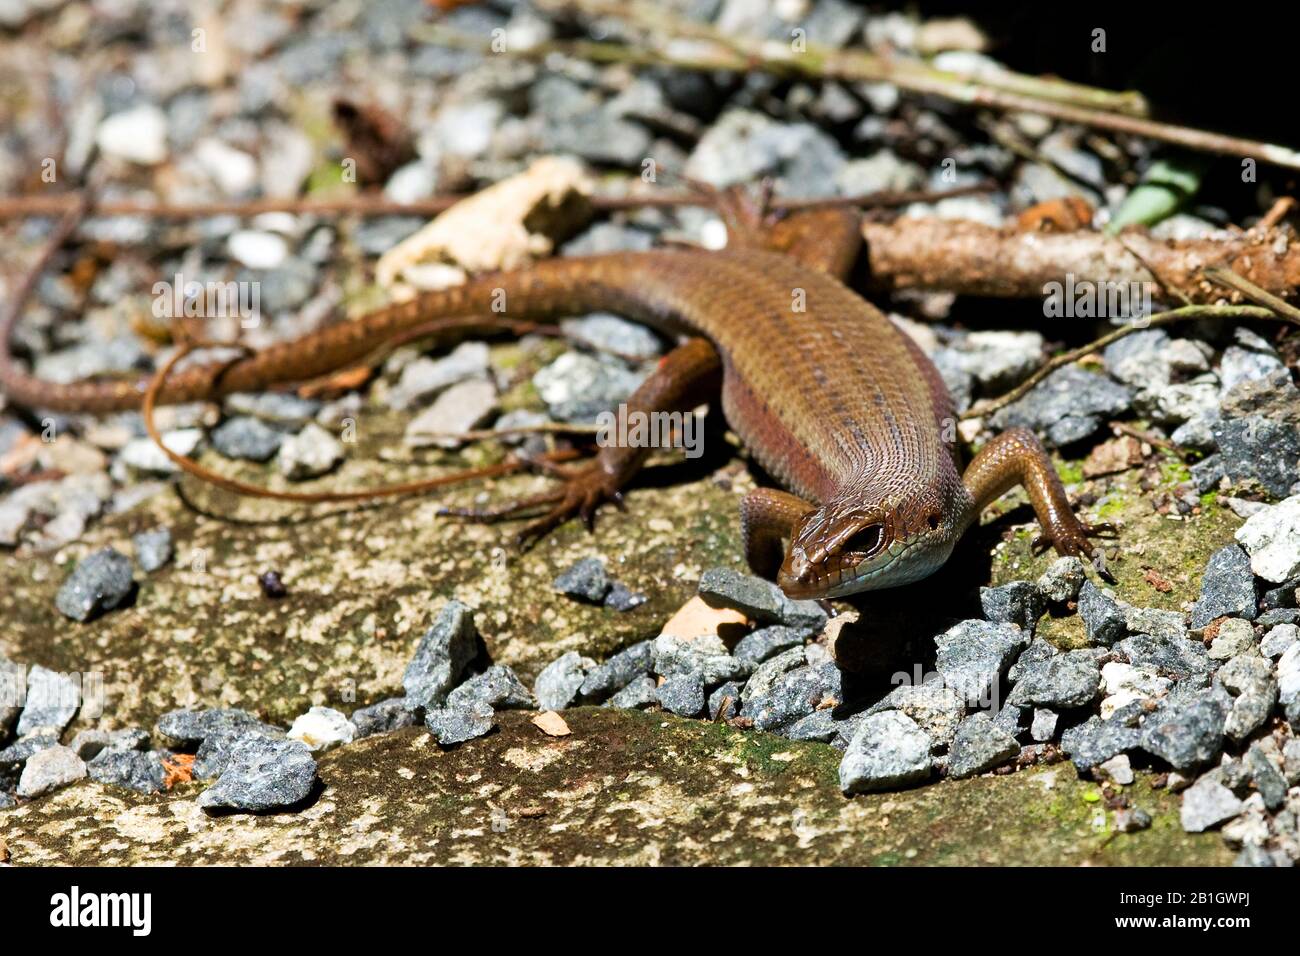 East Indian brown mabuya, many-lined sun skink, many-striped skink, common sun skink, golden skink (Eutropis multifasciata), on stony ground, front view, Malaysia, Borneo Stock Photo